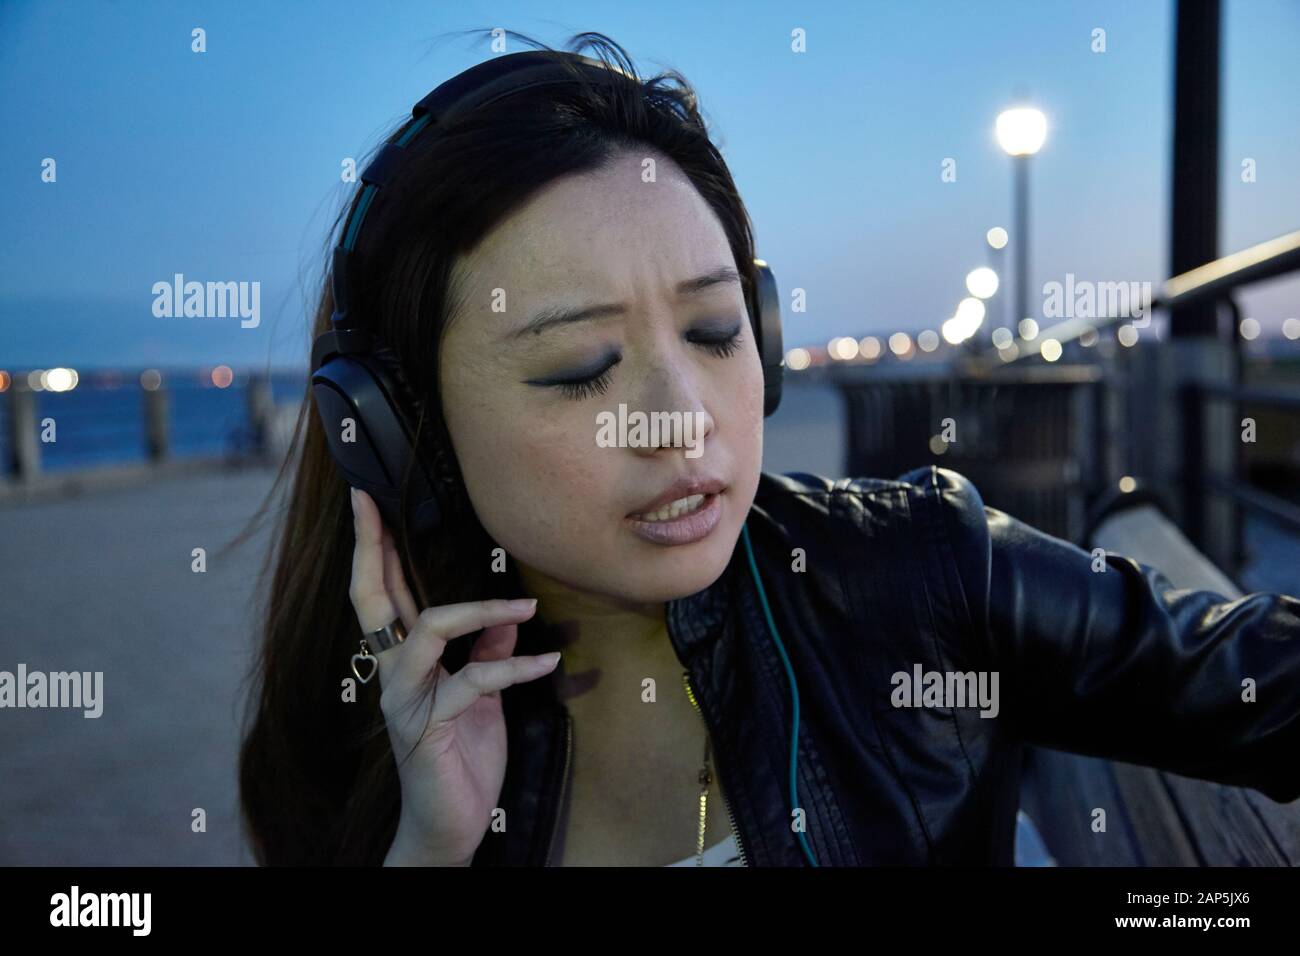 Asian woman listening to headphones in the park Stock Photo